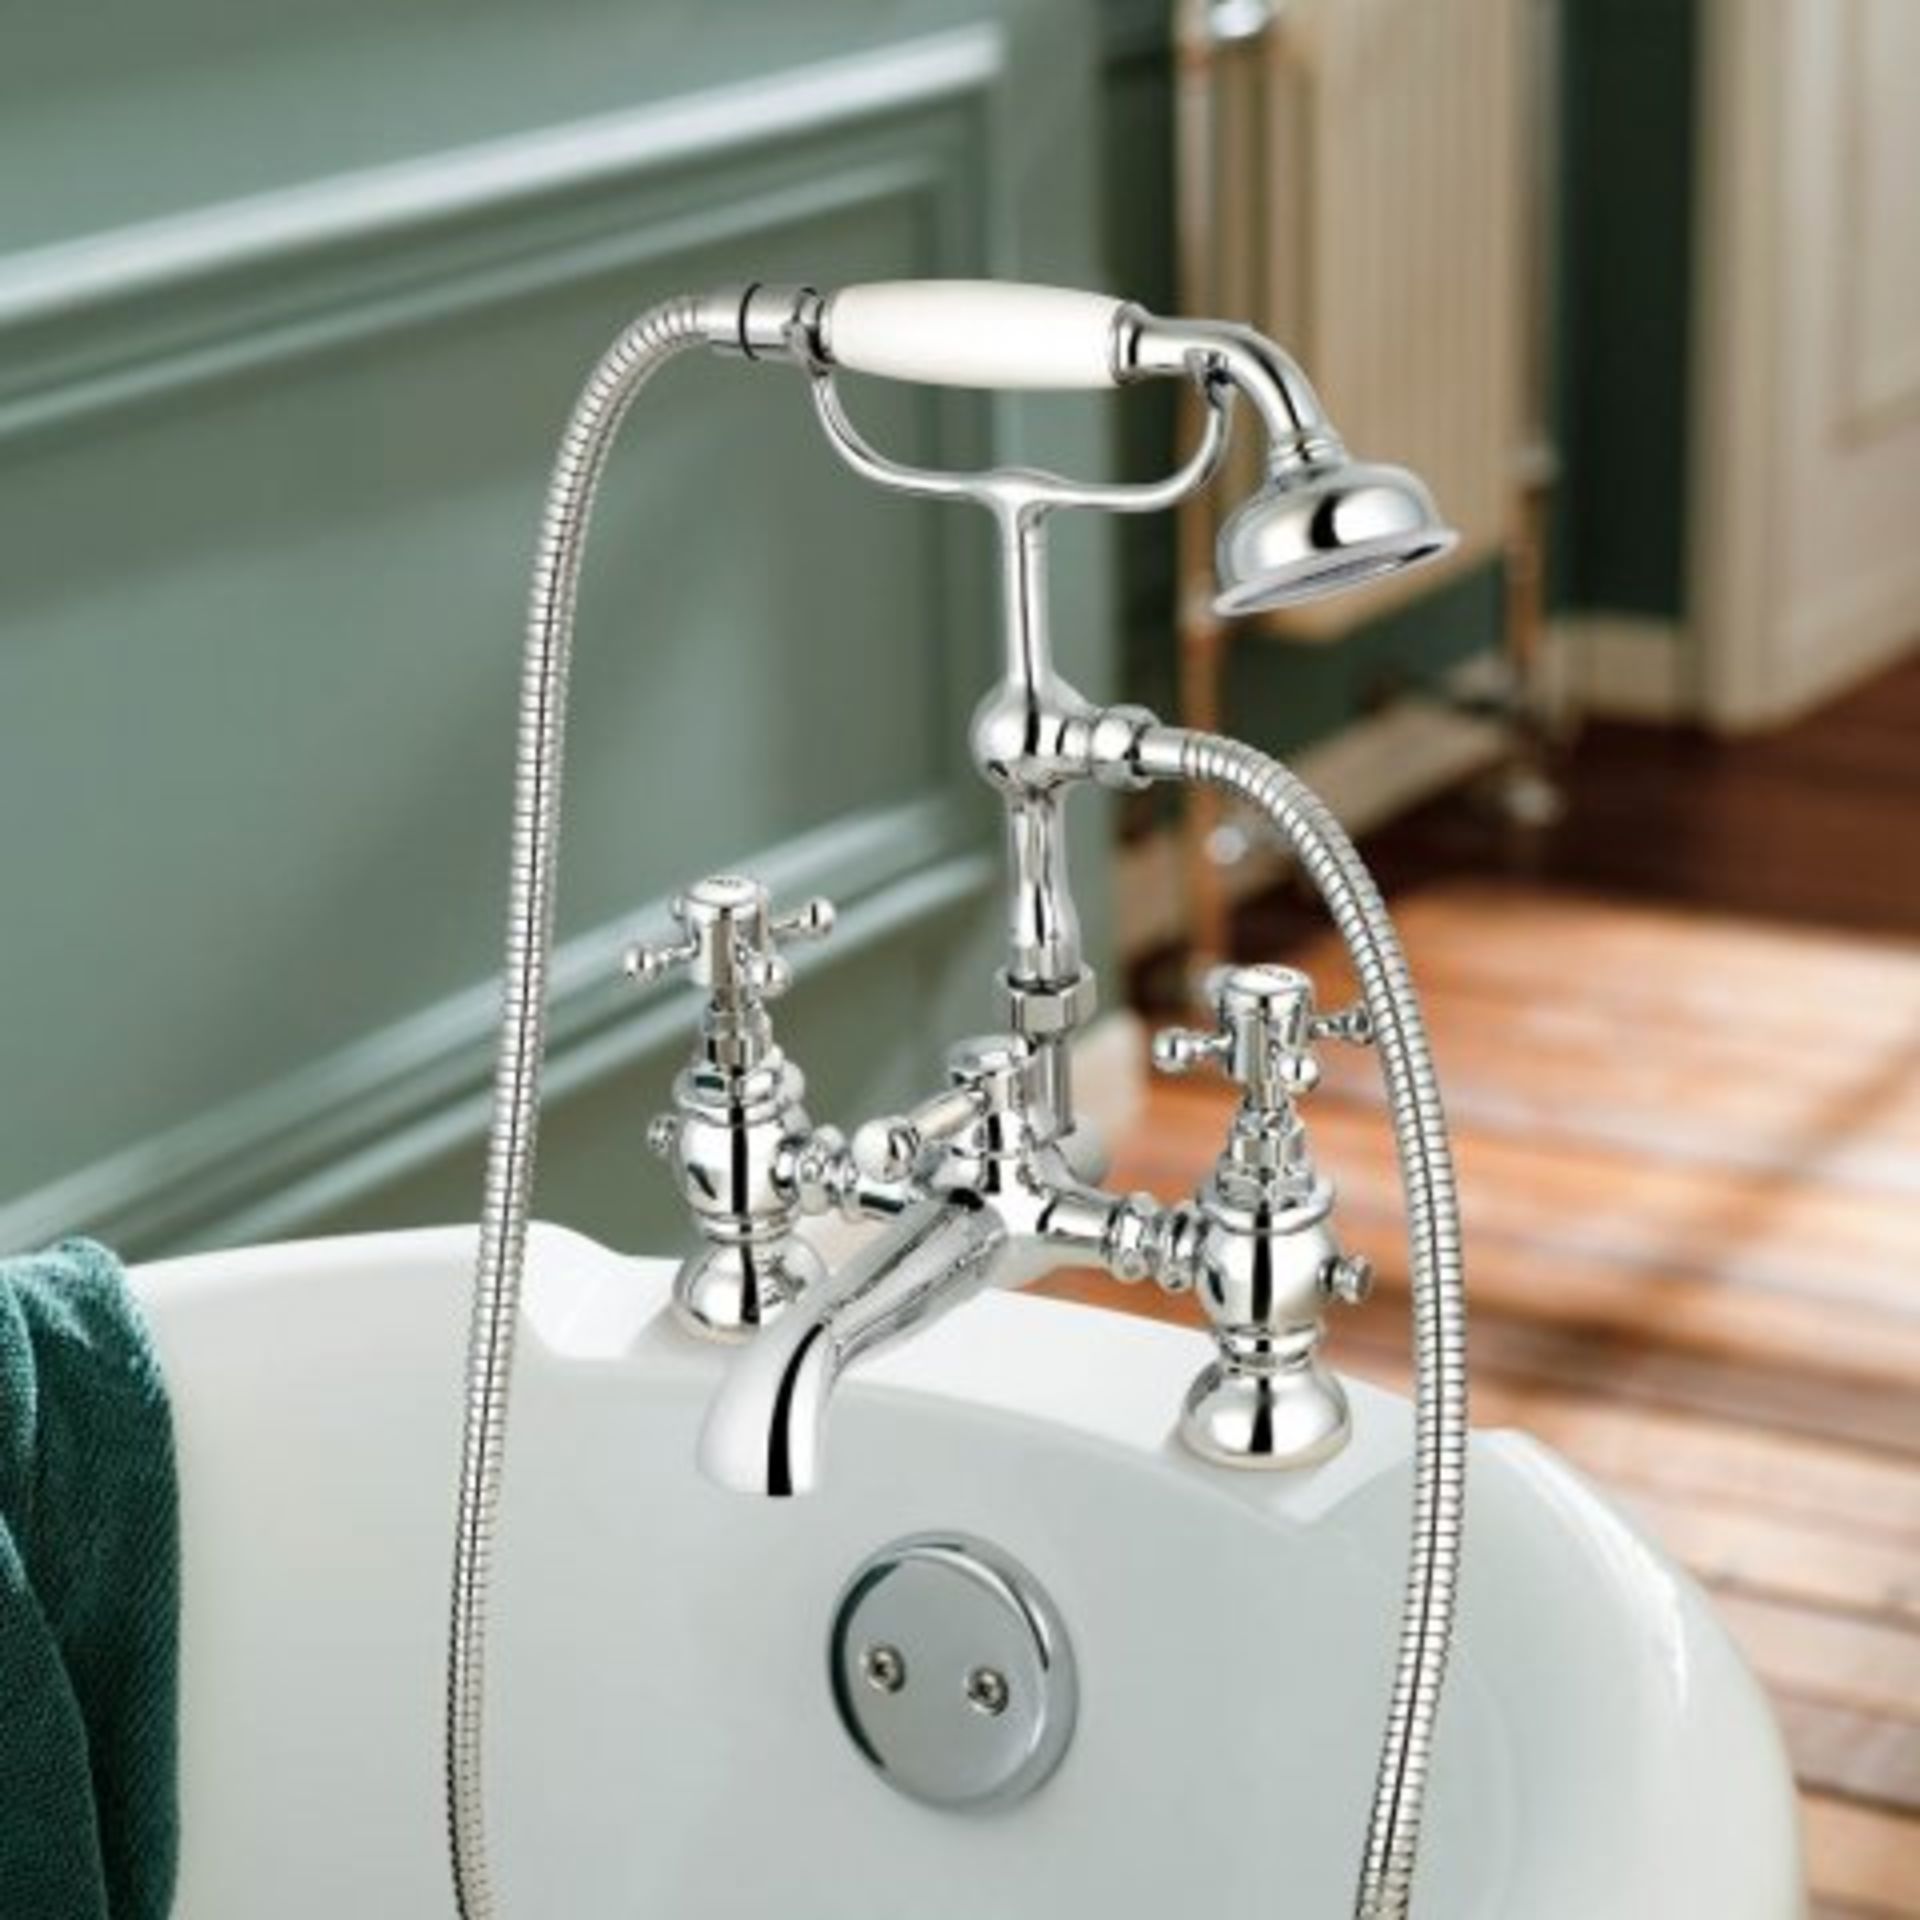 (SKU350) Victoria II Bath Shower Mixer - Traditional Tap with Hand Held Shower Our great range of